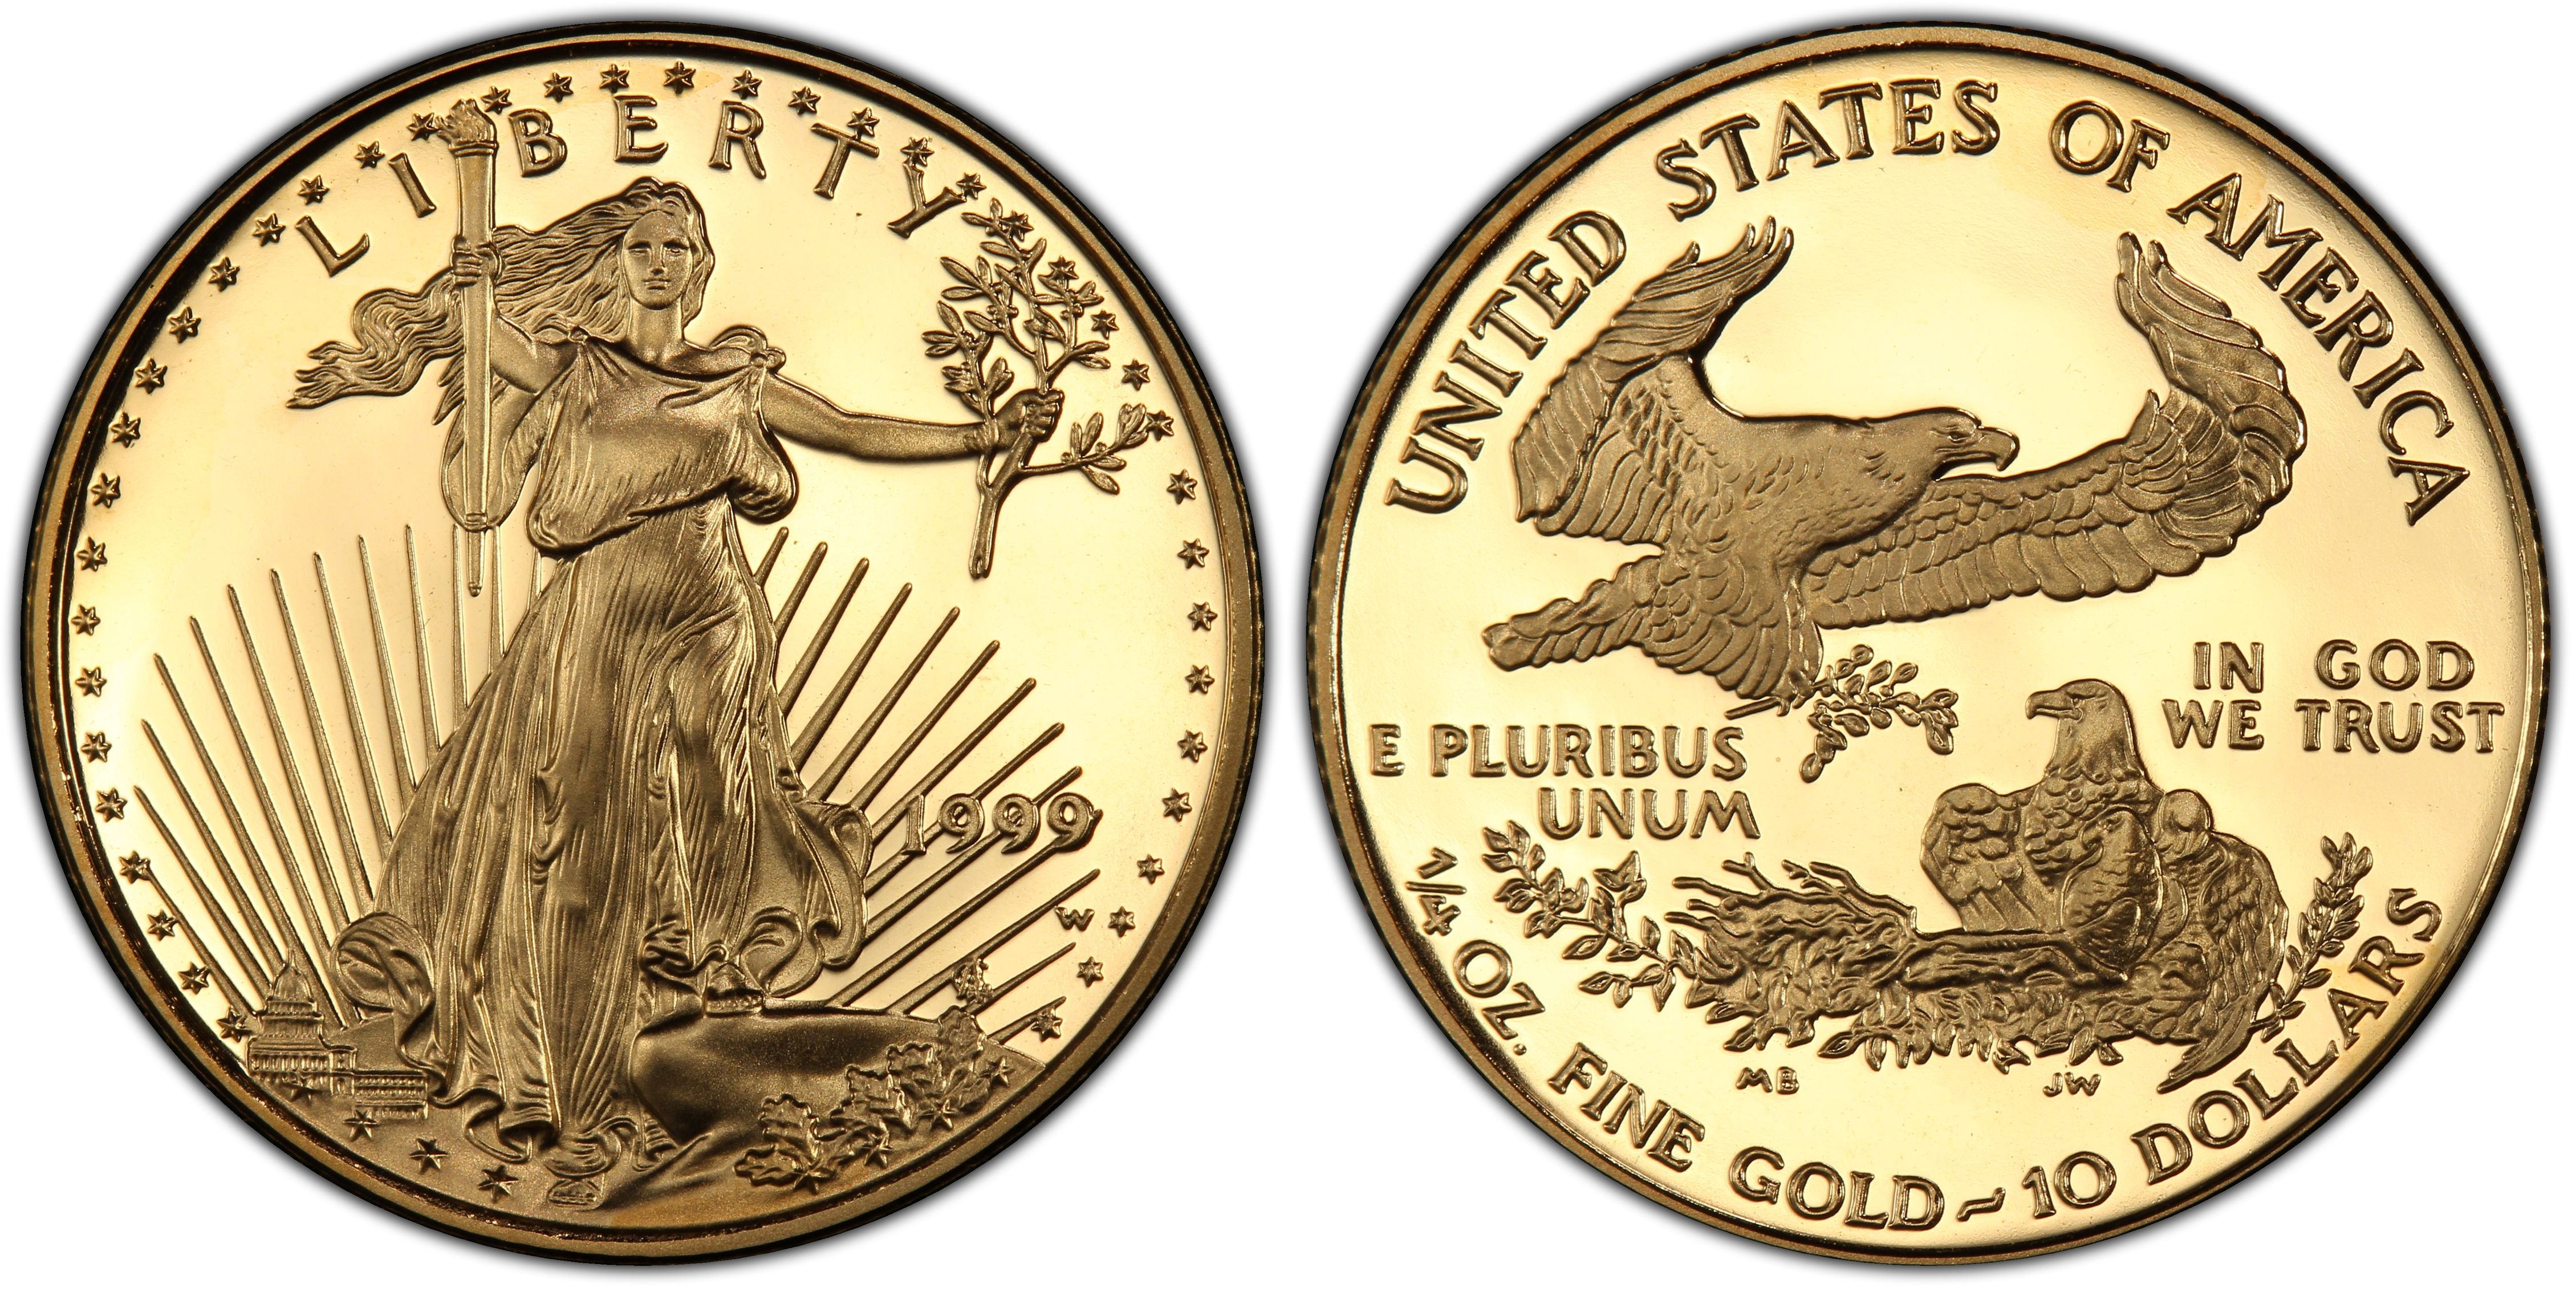 1999-W $10 Gold Eagle, DCAM (Proof) Gold Eagles - PCGS CoinFacts